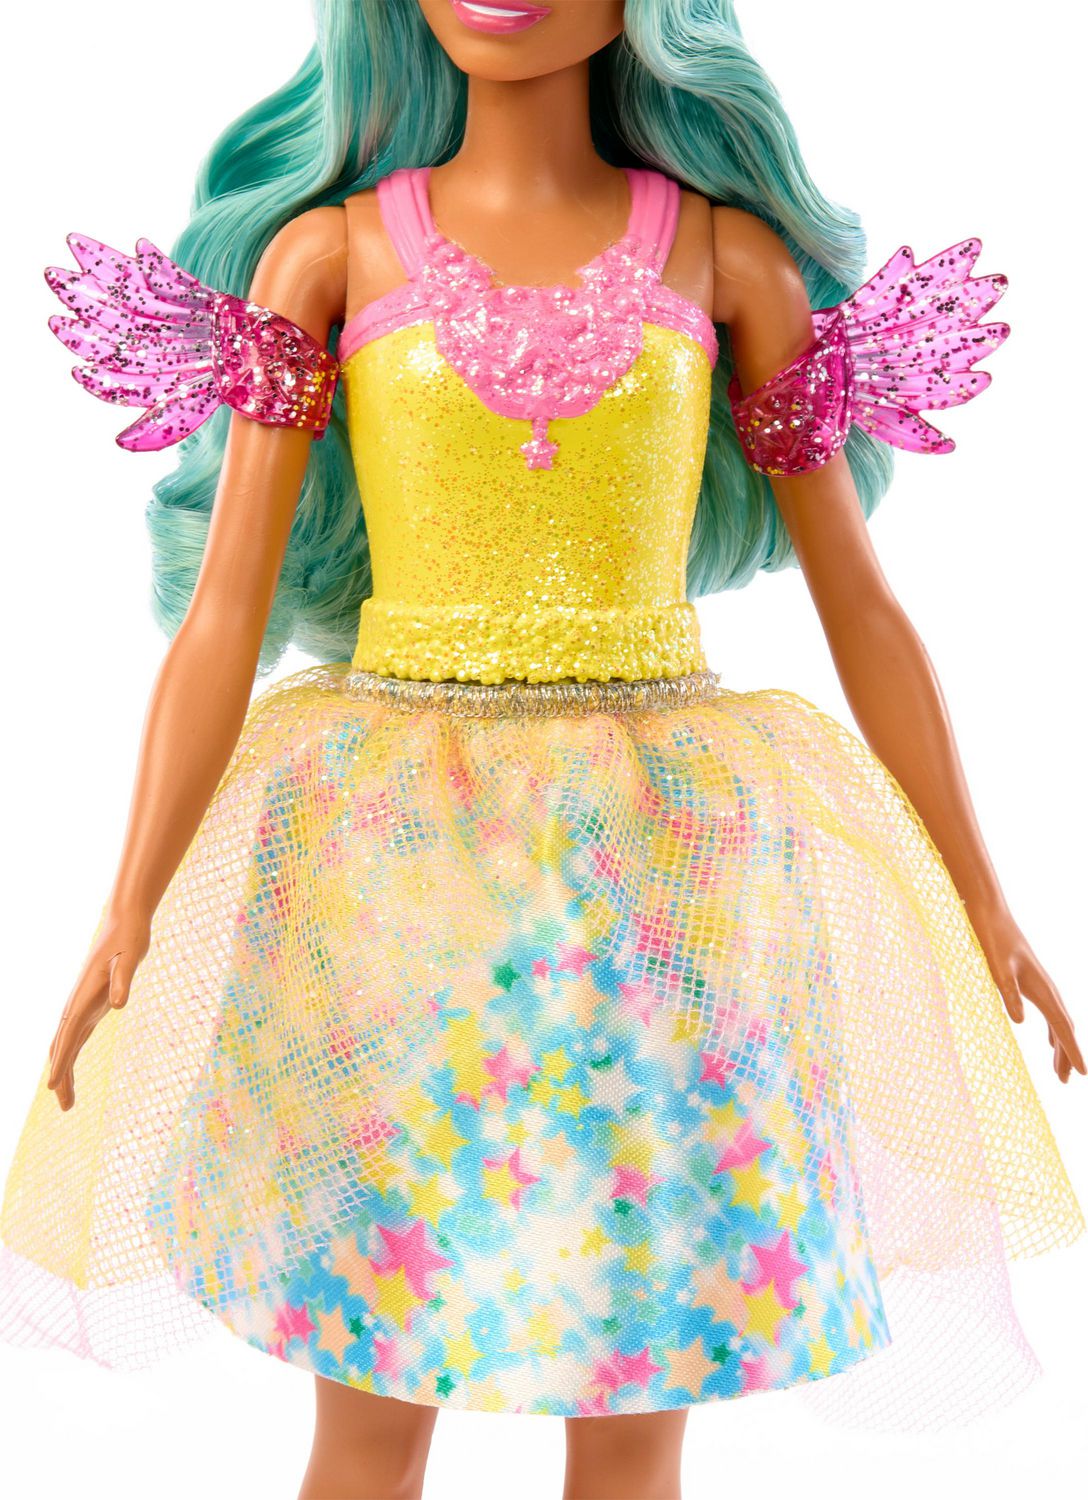 Barbie Doll with Fairytale Outfit and Pet, Teresa from Barbie A Touch 